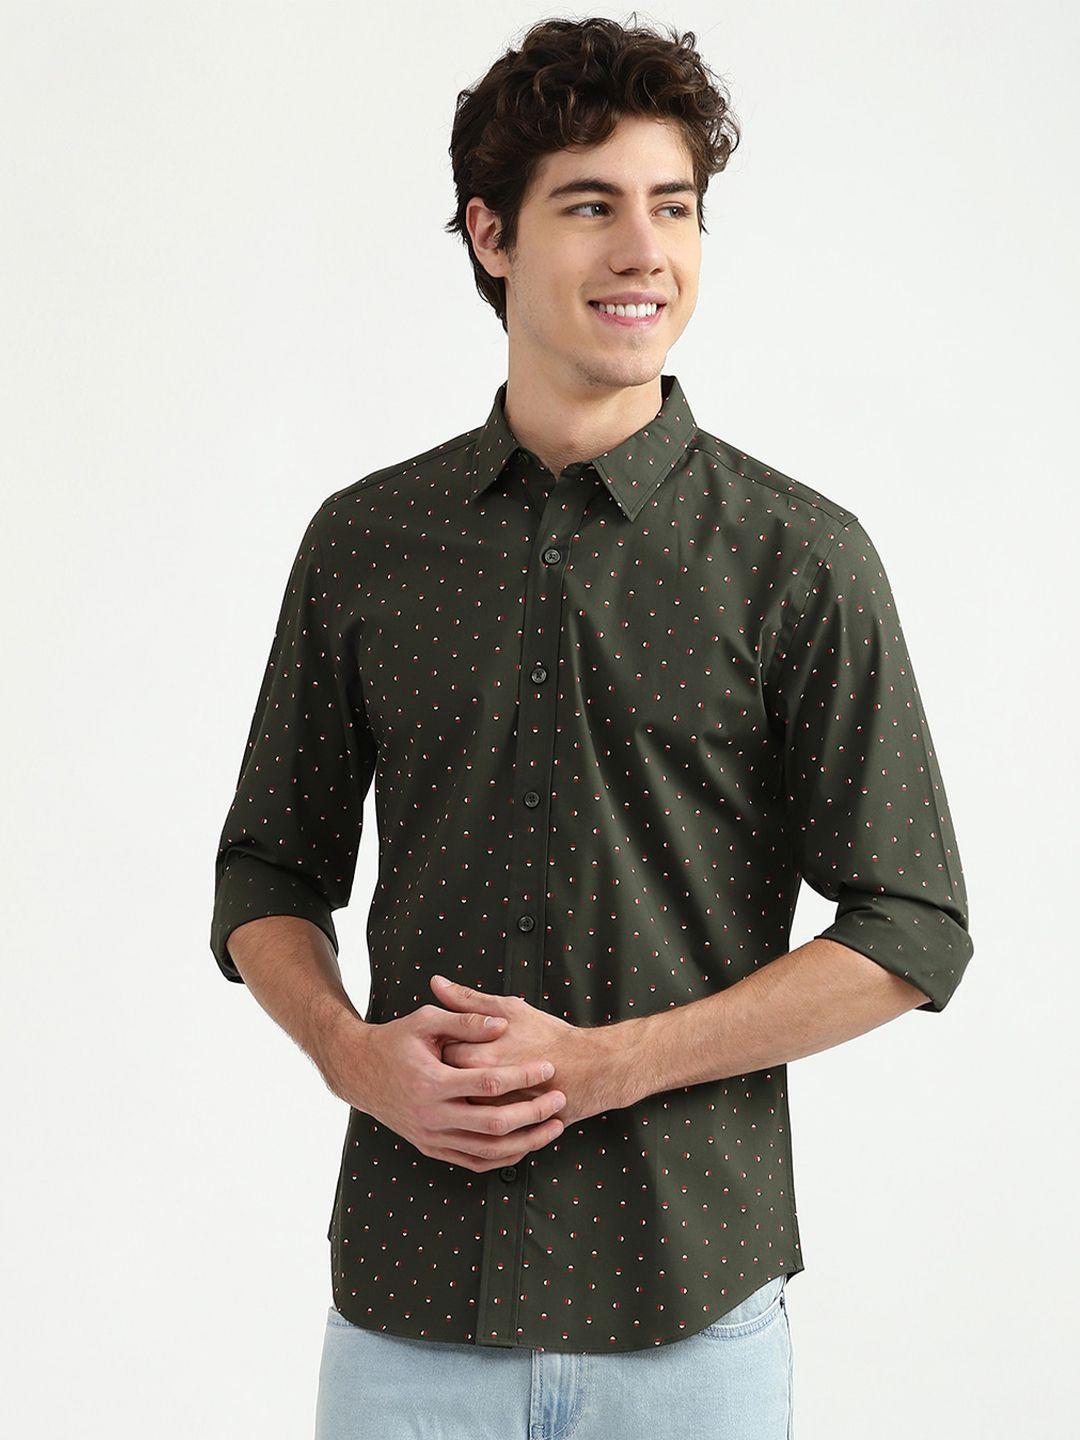 united colors of benetton men olive green printed cotton casual shirt